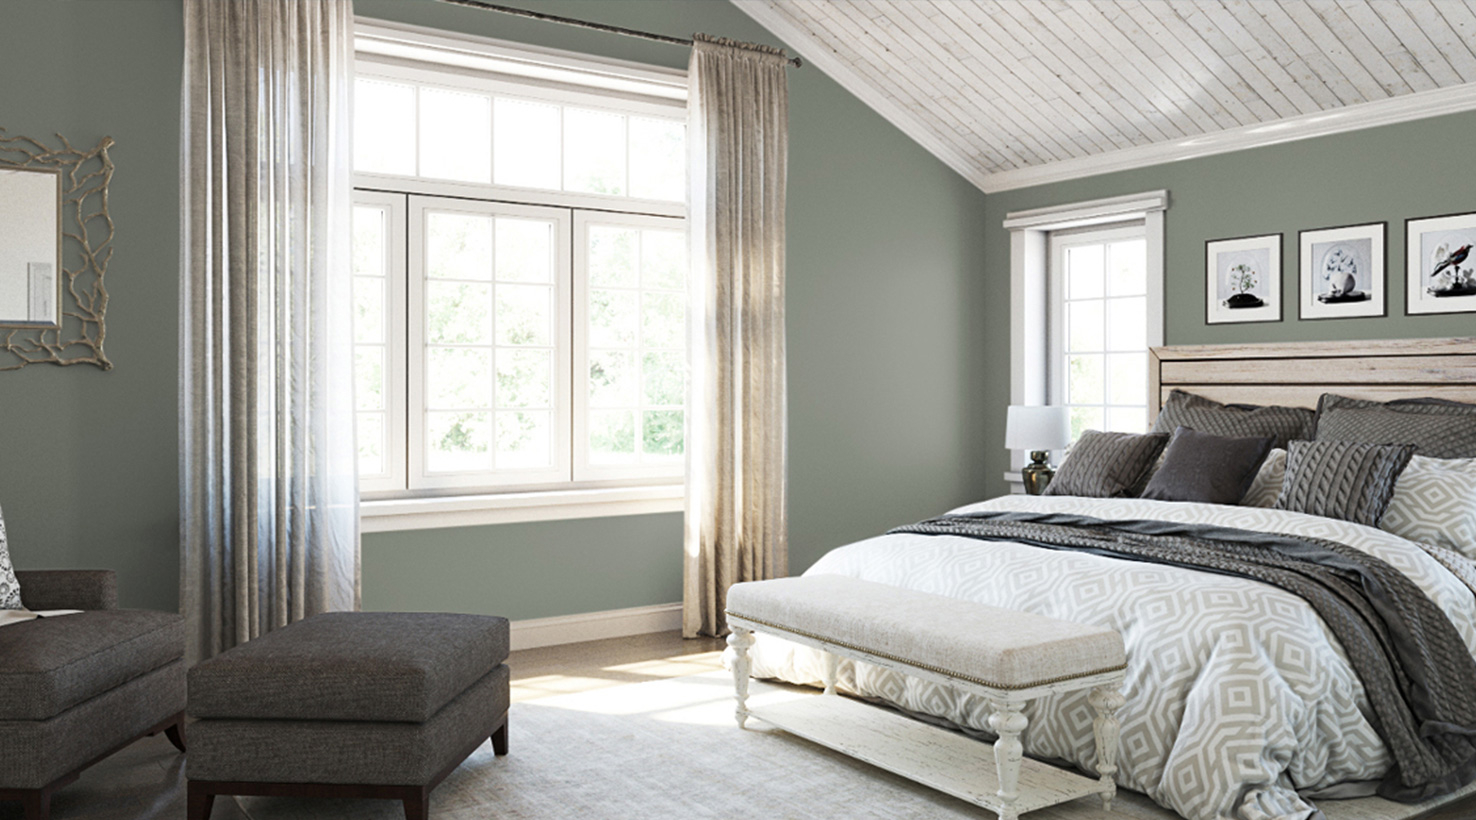 Bedroom Paint Color Ideas Inspiration Gallery Sherwin Williams within sizing 1476 X 820